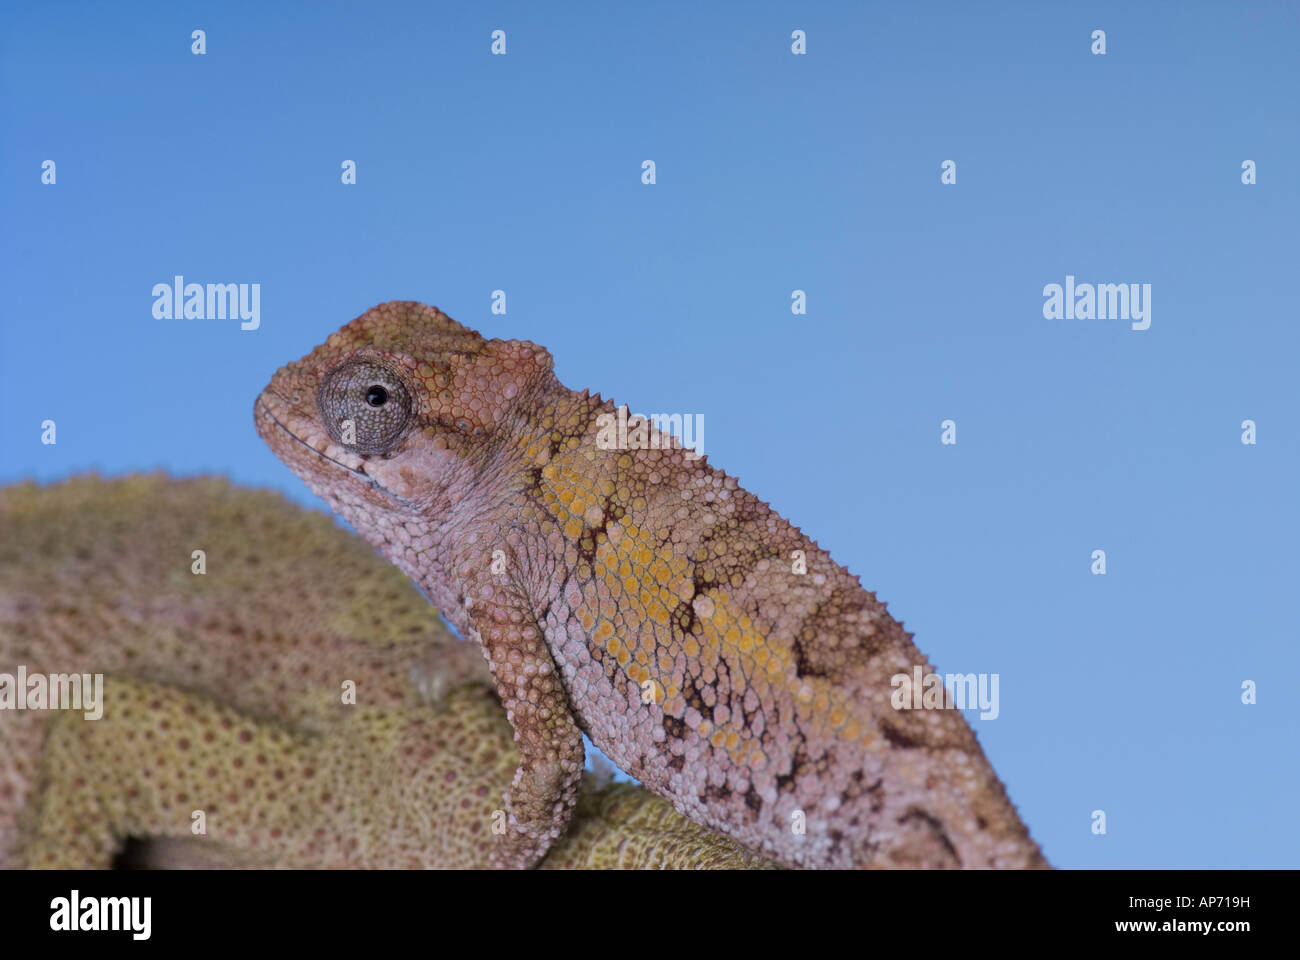 Young chameleon with diamond pattern Stock Photo